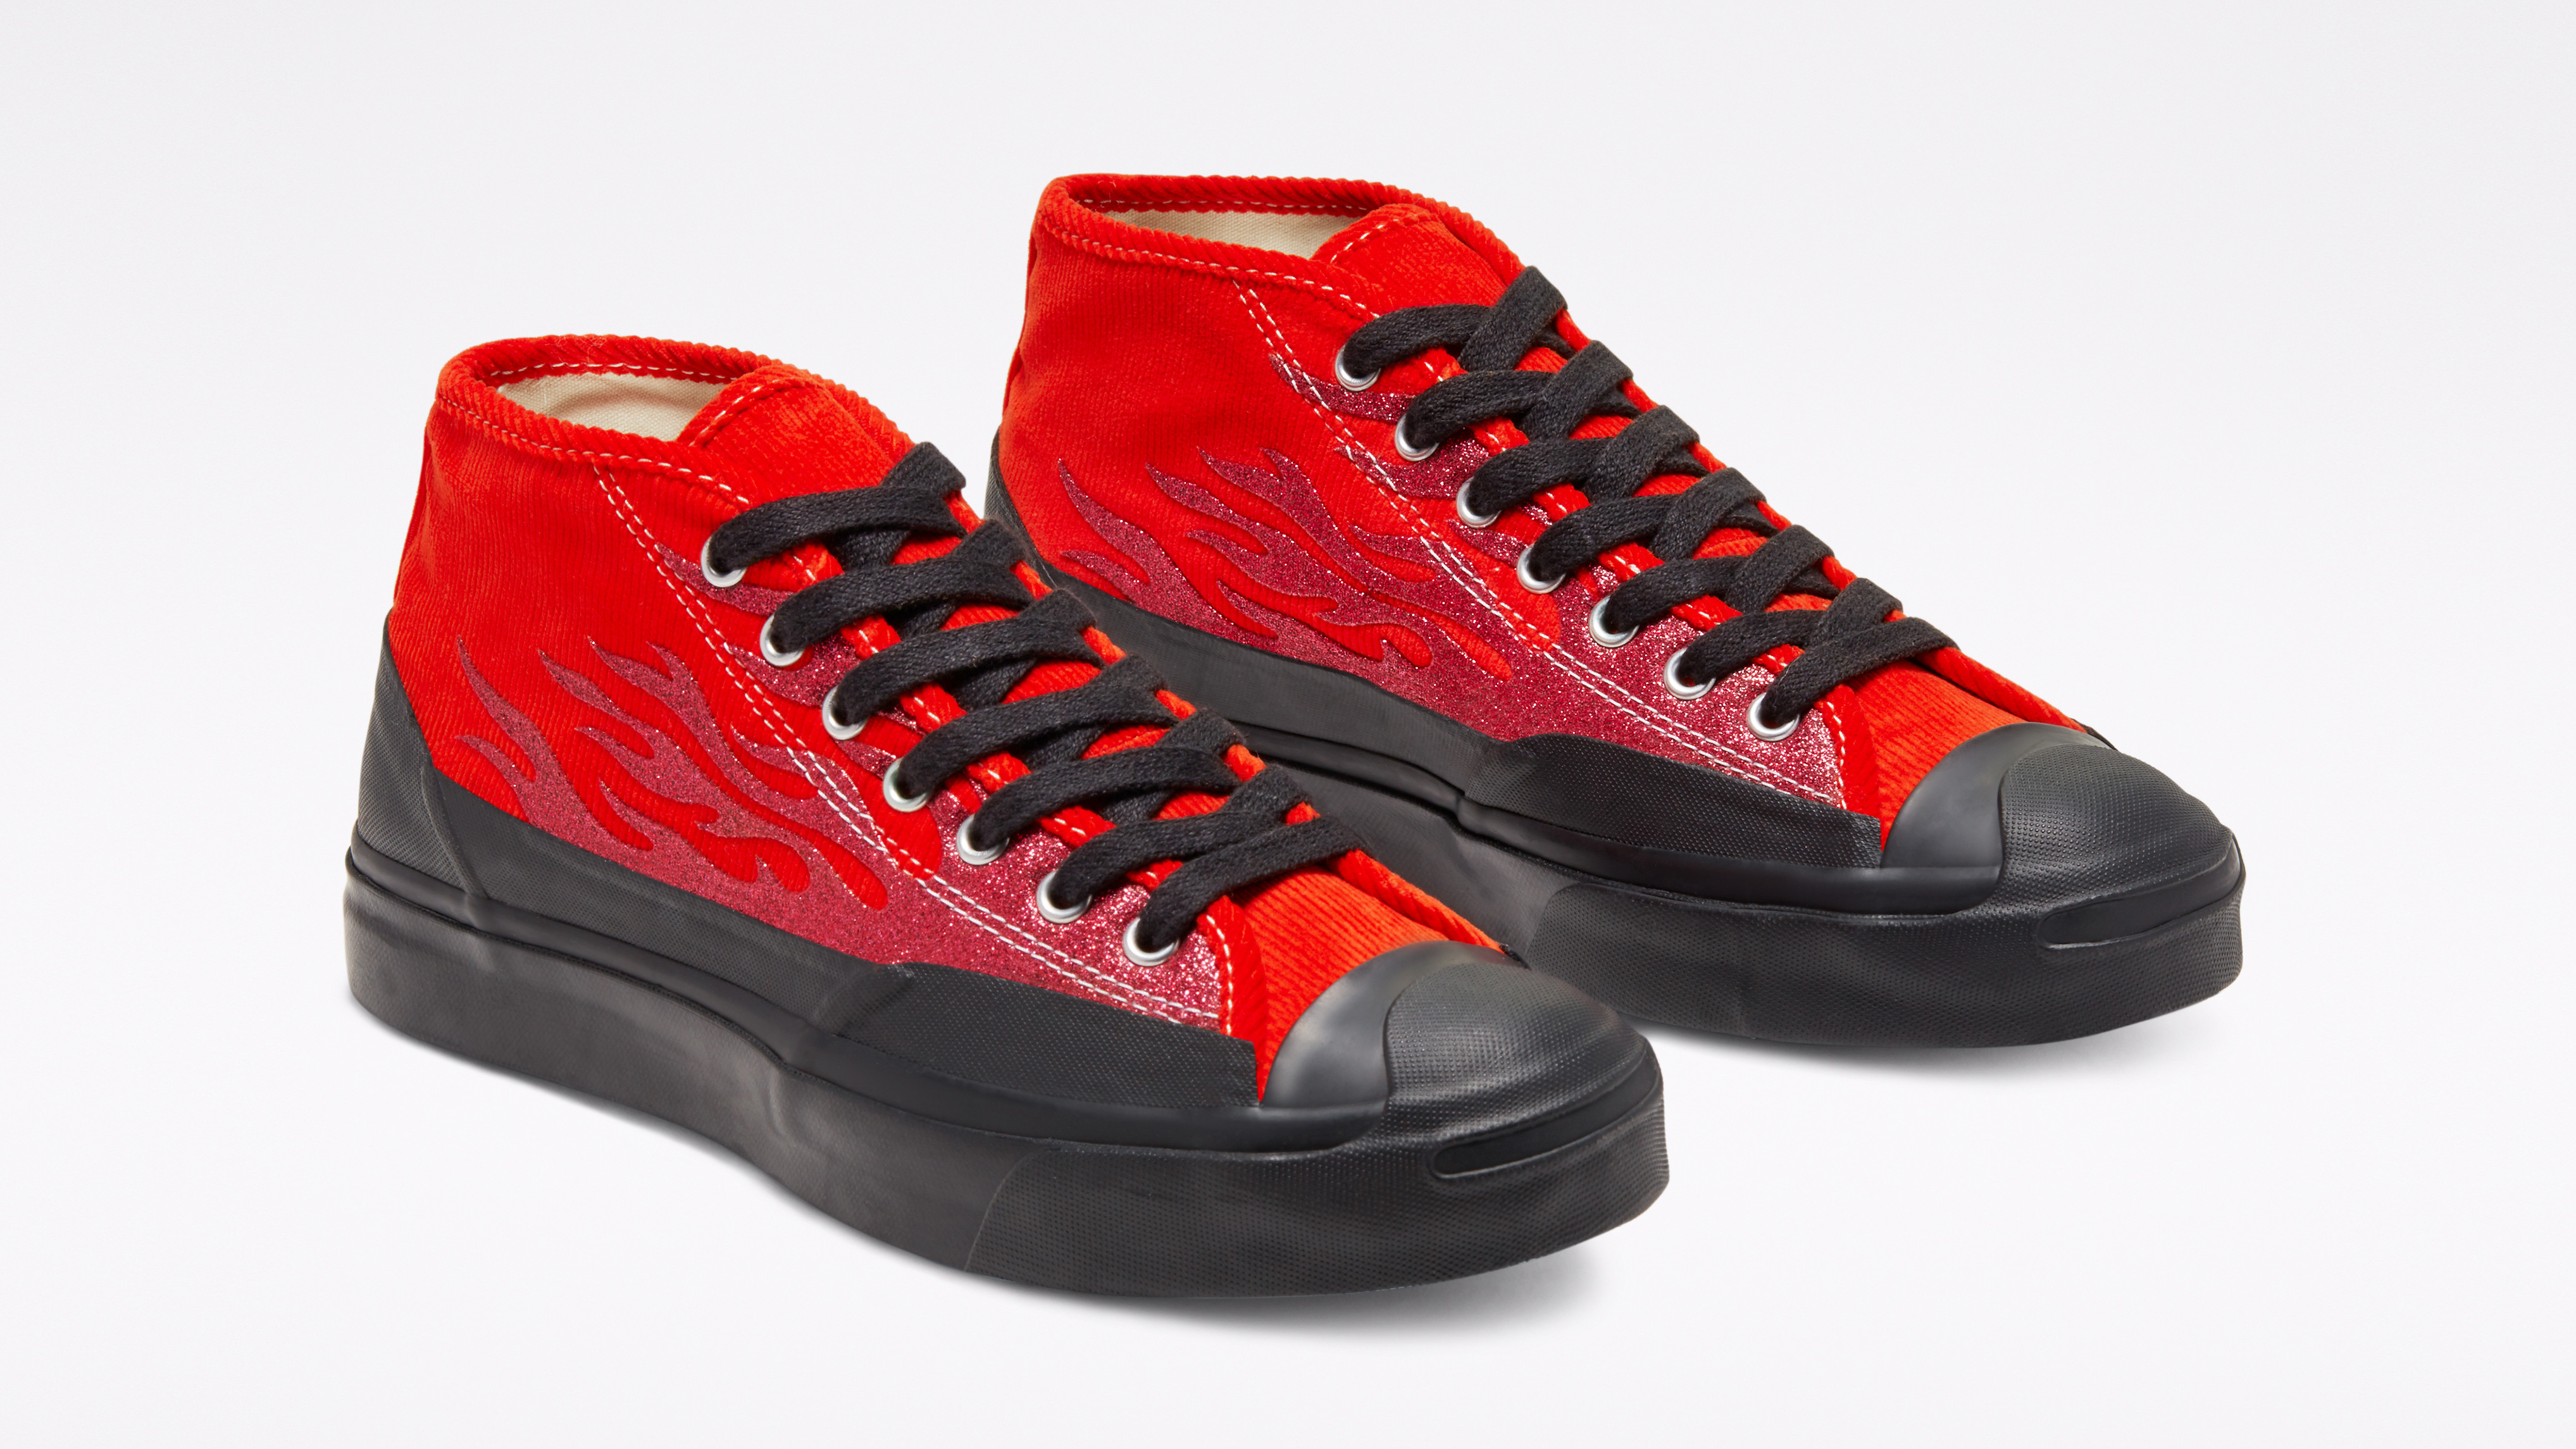 ASAP Nast x Jack Purcell Mid Date | Sole Collector